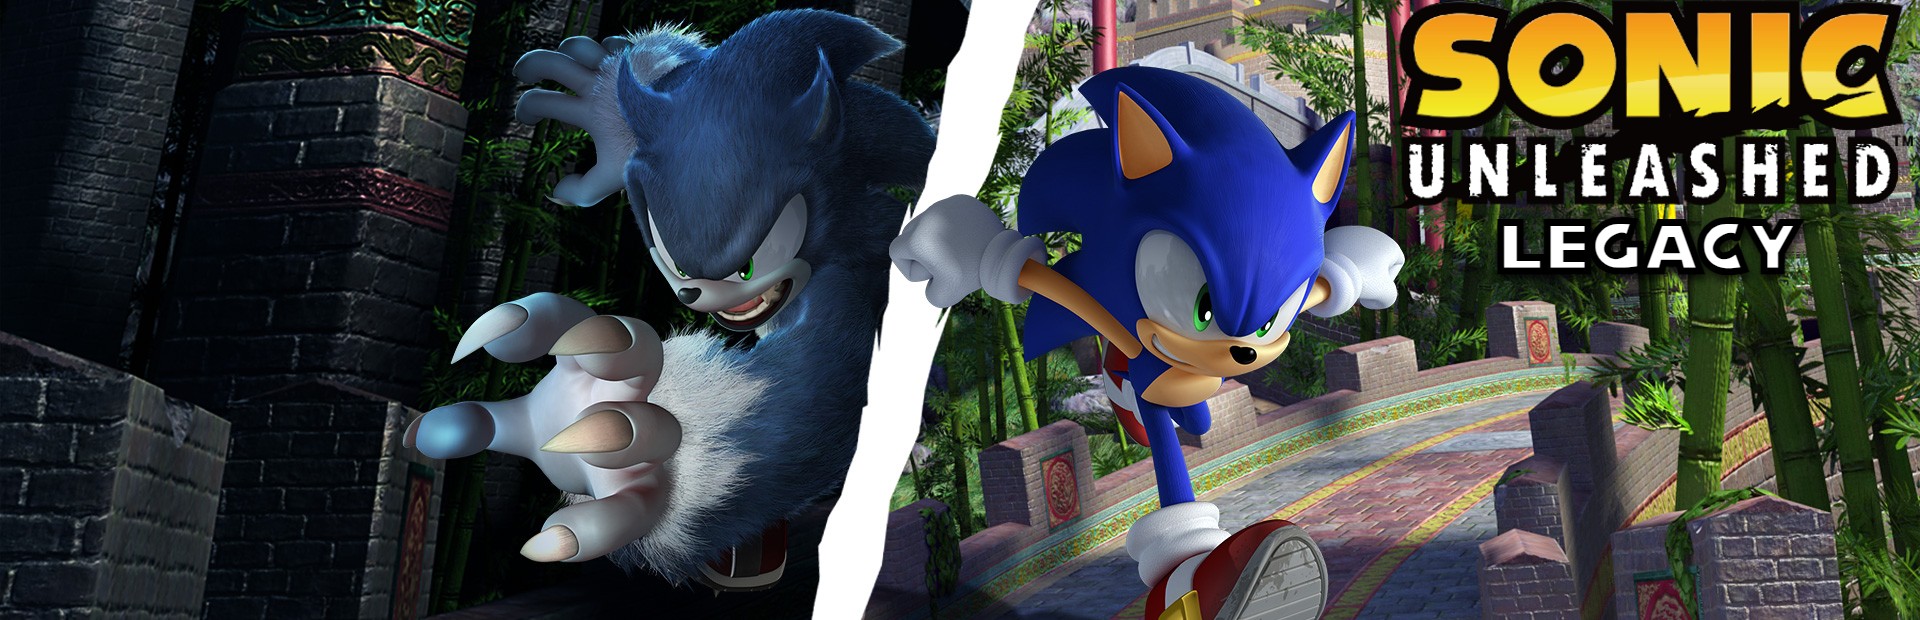 Sonic Unleashed Legacy